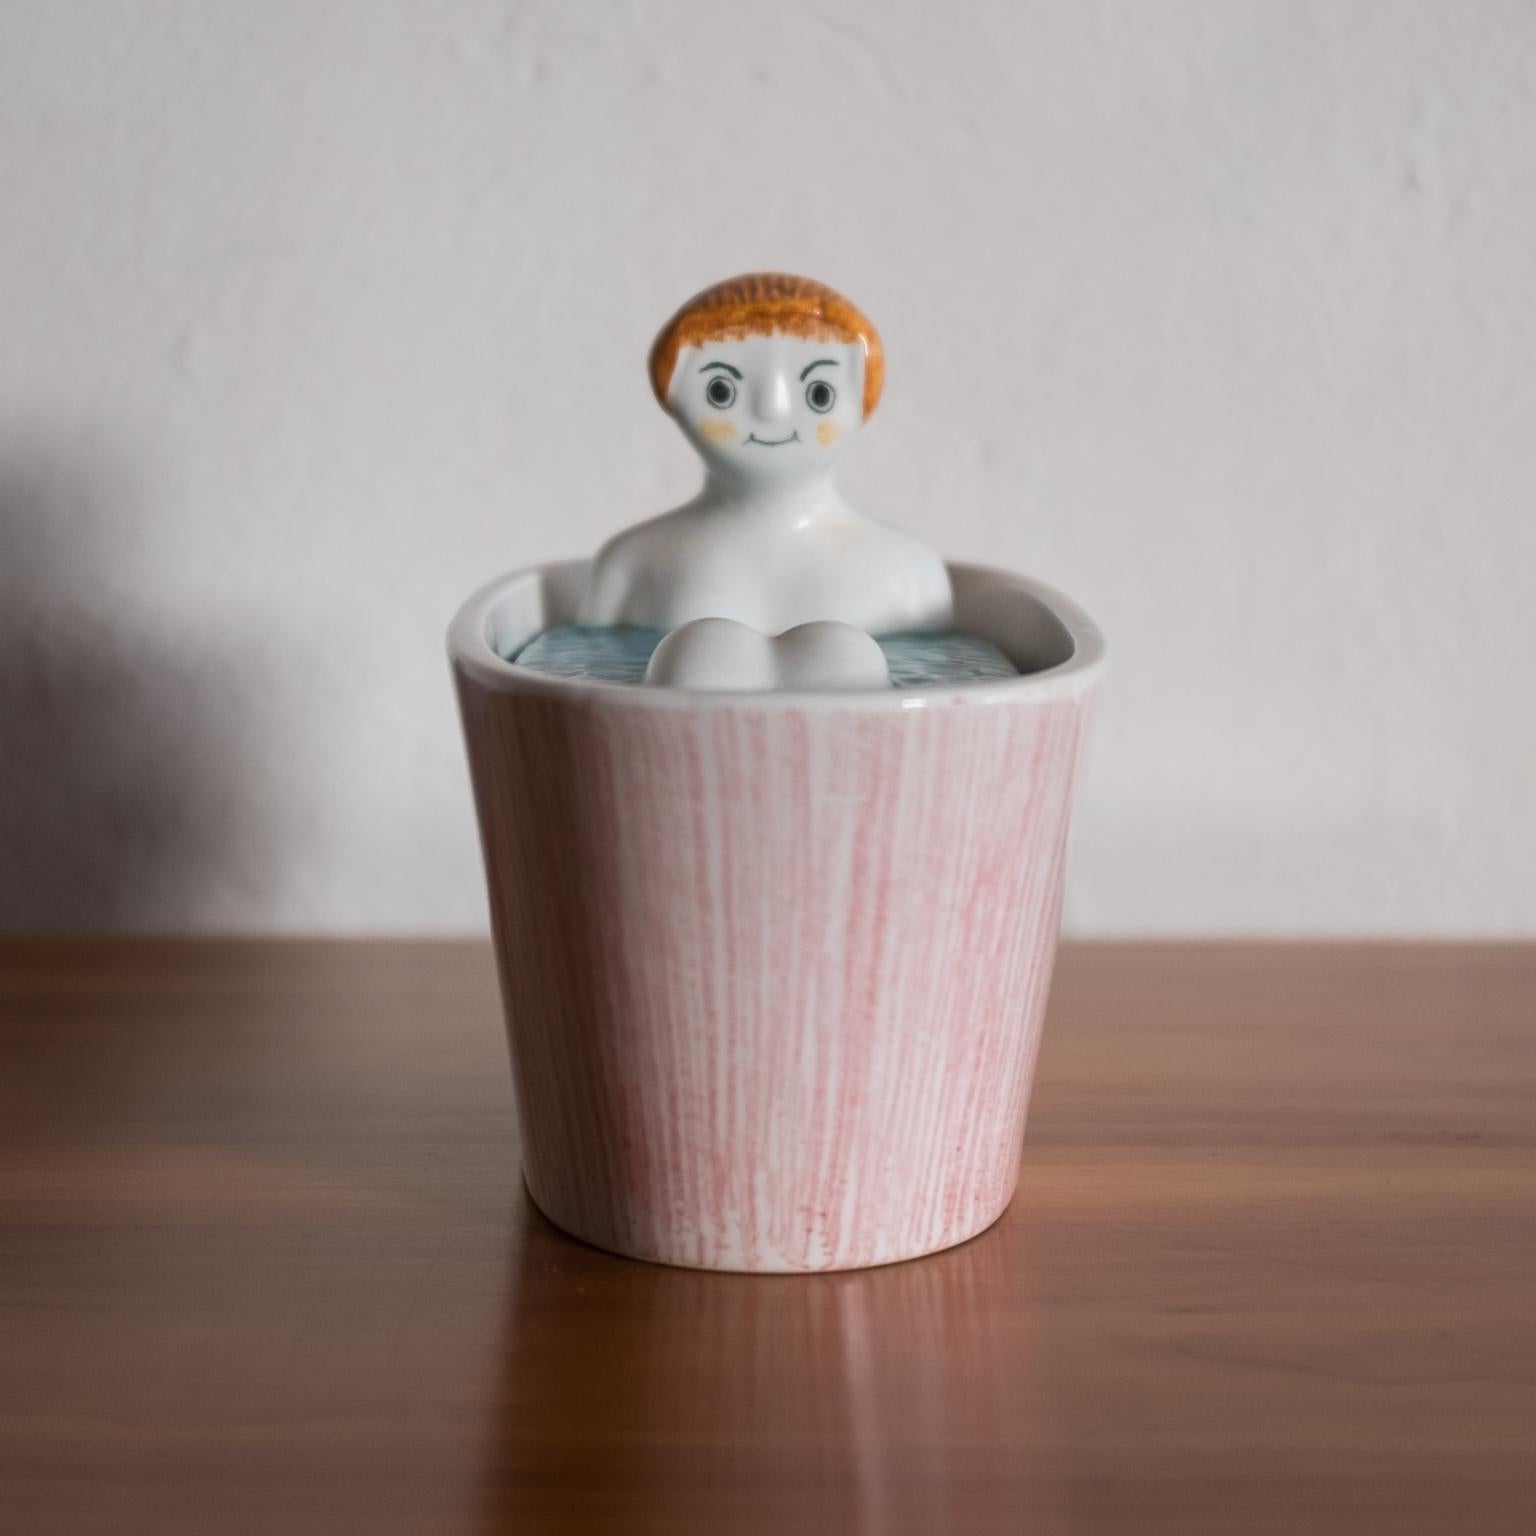 Lidded ceramic box by Giancarlo Tunsi Girard from the 1960s. Includes a label from the high-end department store, I. Magnin. 

Tunsi Girard was the brother of Alexander Girard. Tunsi and Alexander grew up in Italy, where Tunsi lived and worked.